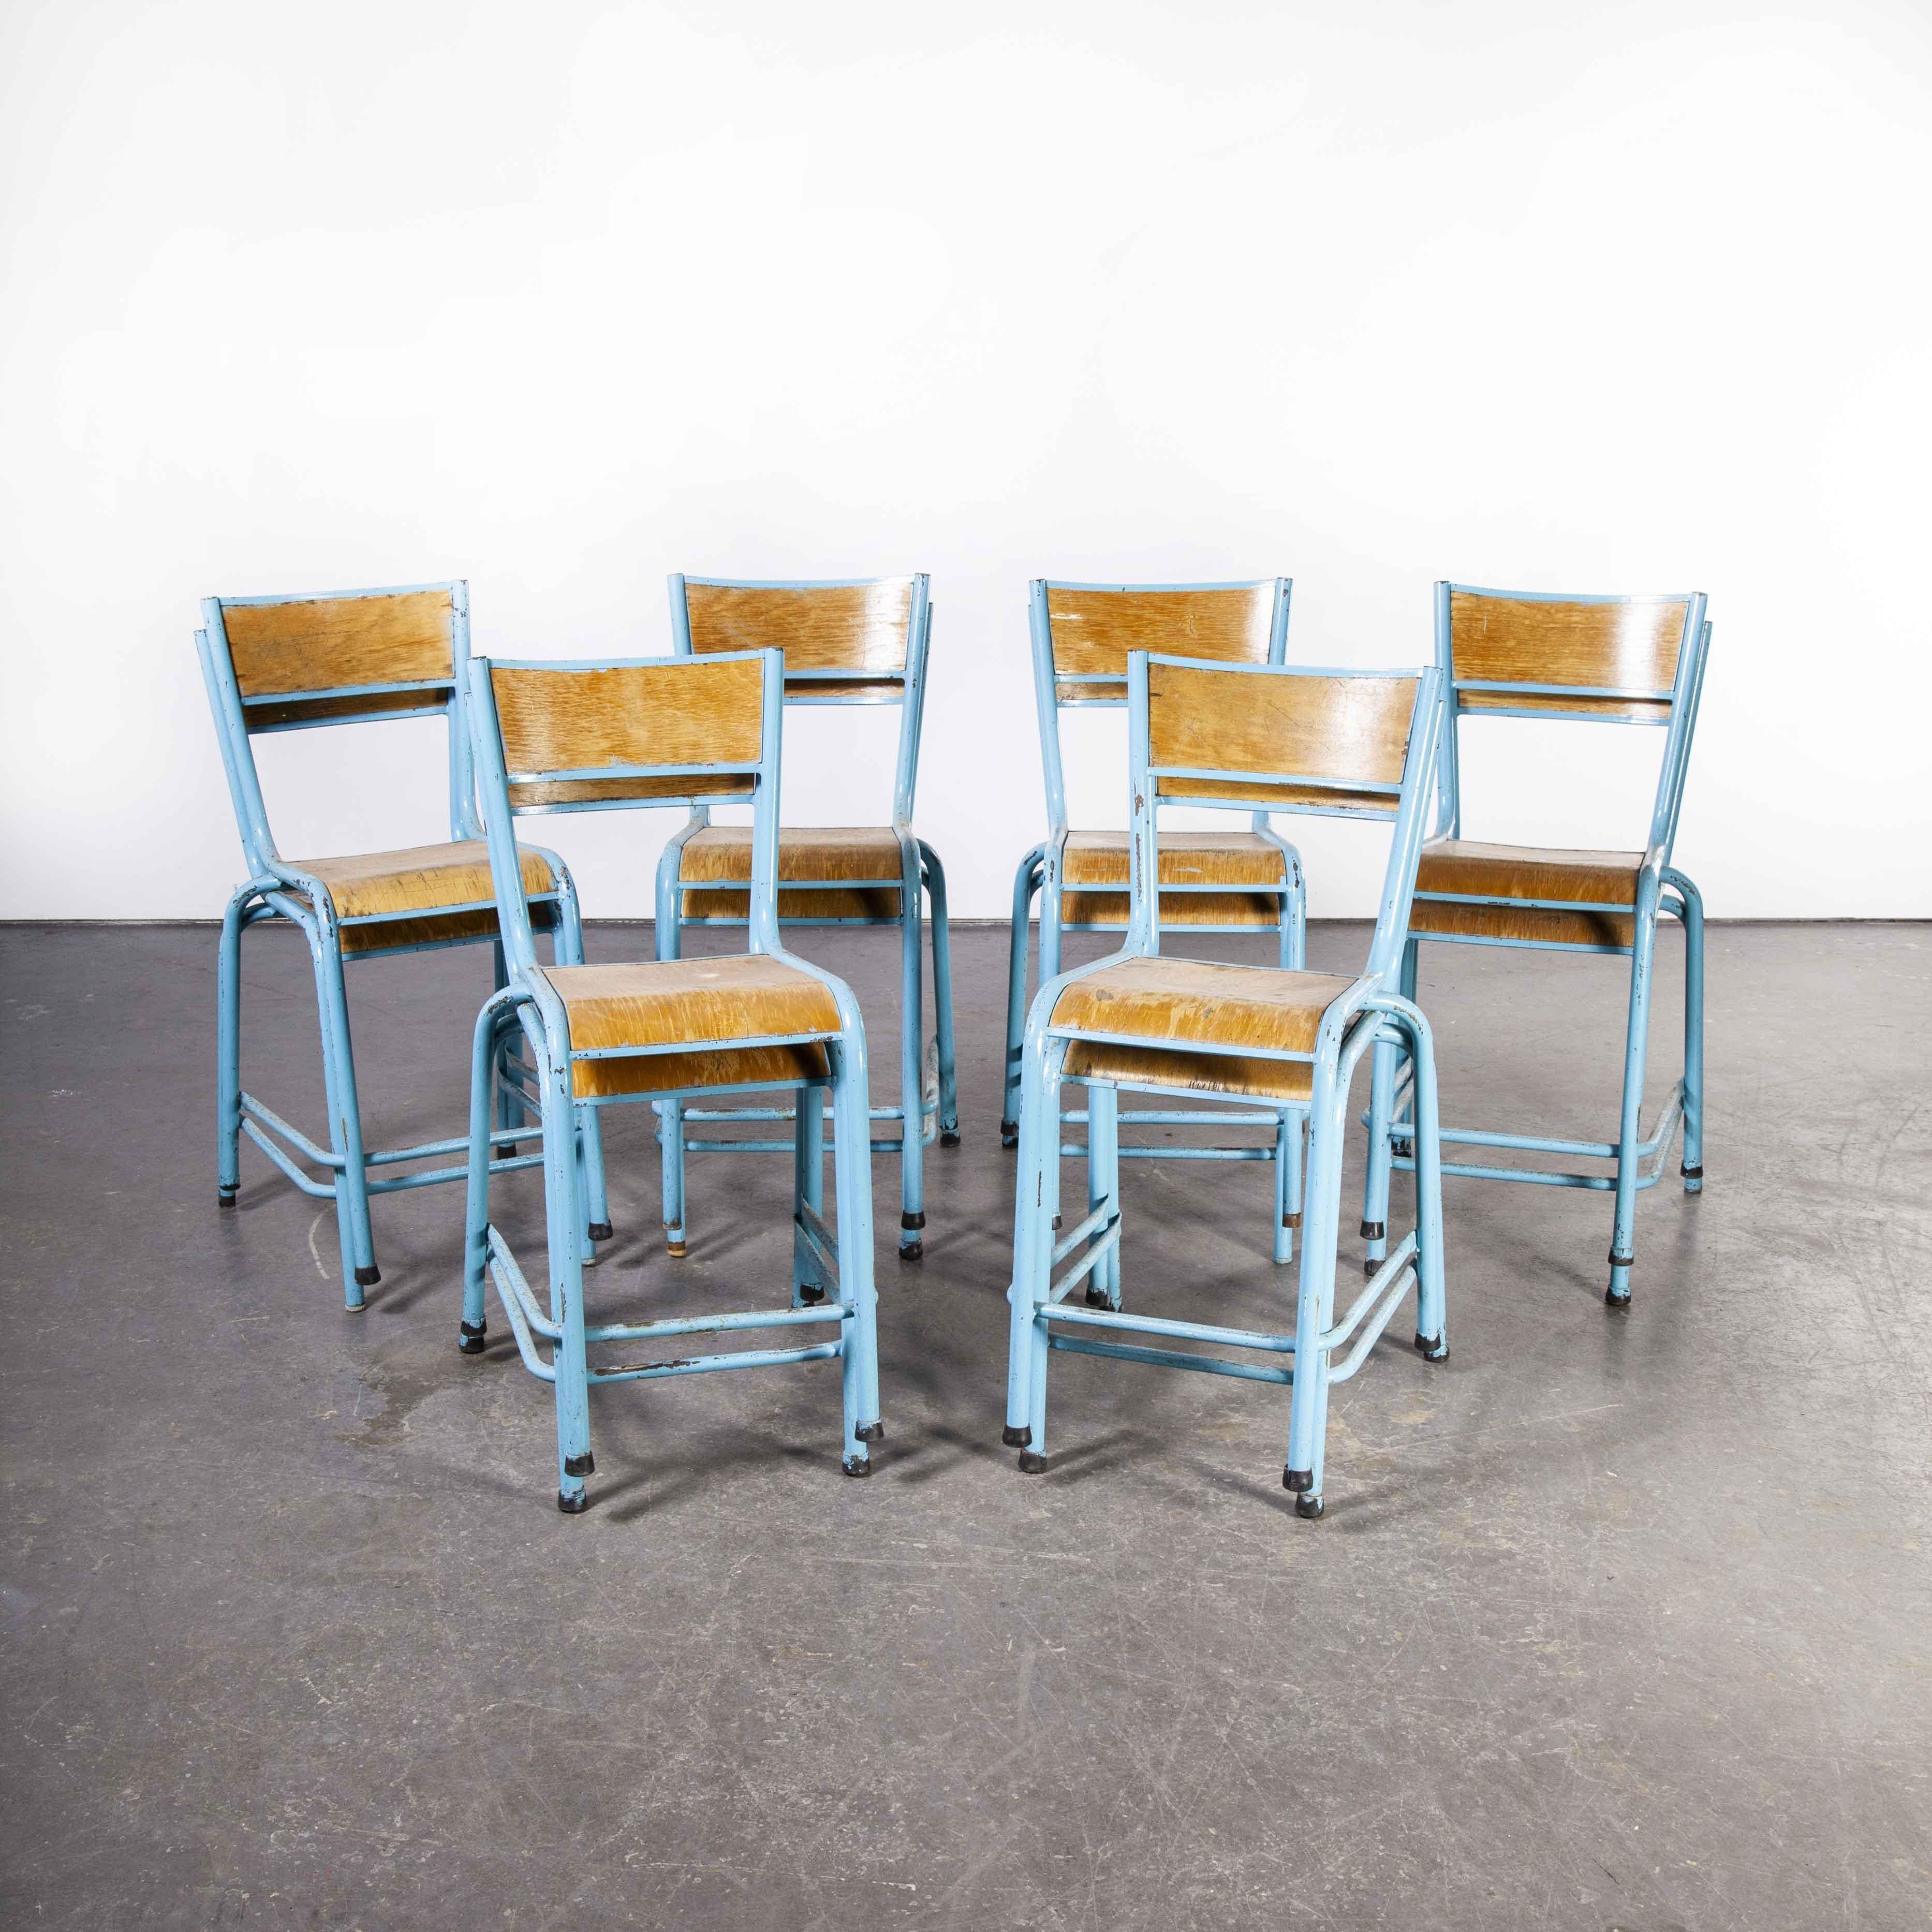 1950s Mullca High Laboratory Stacking Dining Chairs – Blue – Set Of Twelve
1950s Mullca High Laboratory Stacking Dining Chairs – Blue – Set Of Twelve. One of our most favourite chairs the higher seat (53 cm) laboratory high chairs made by Mullca,